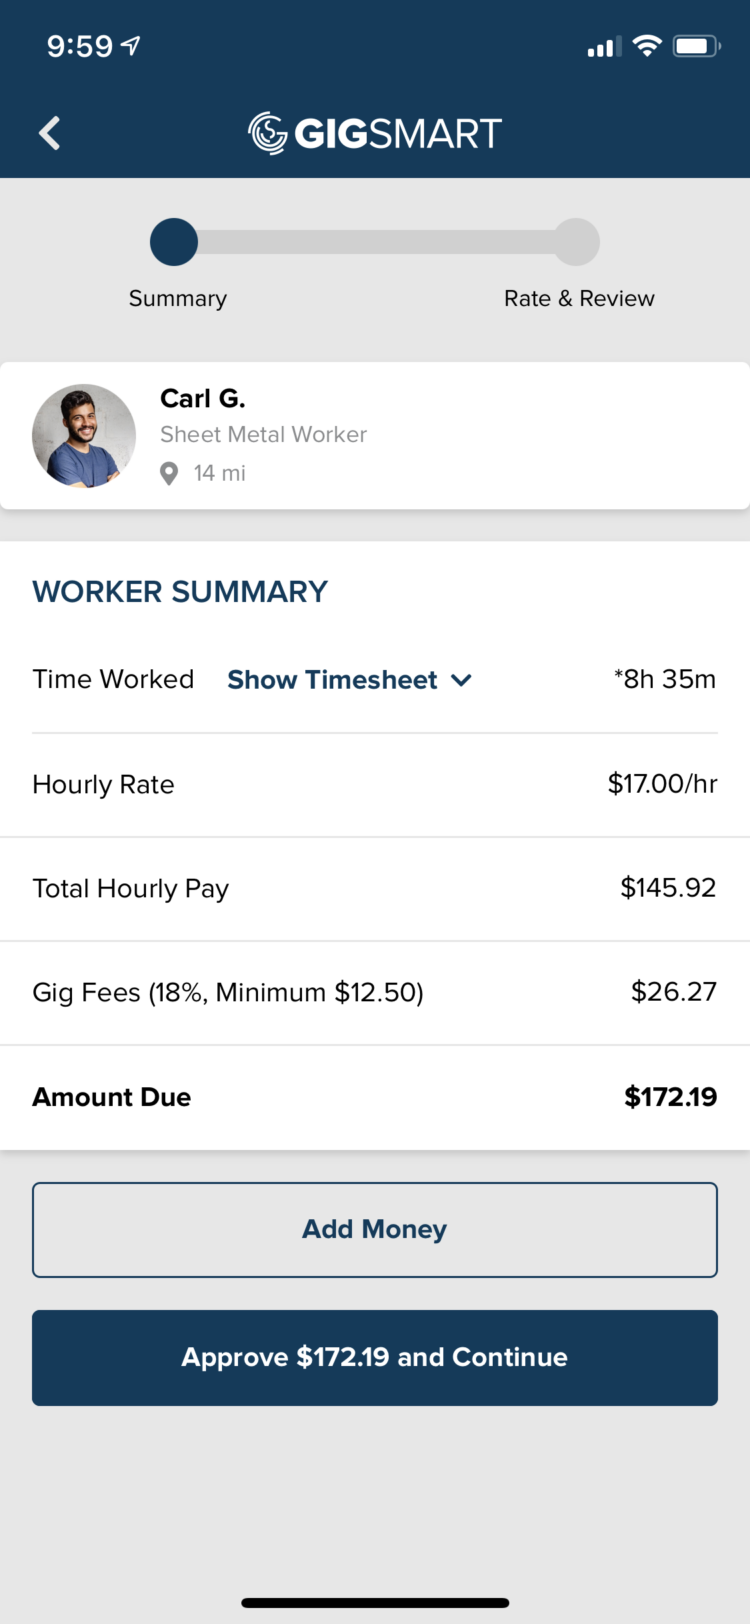 Only pay for completed work